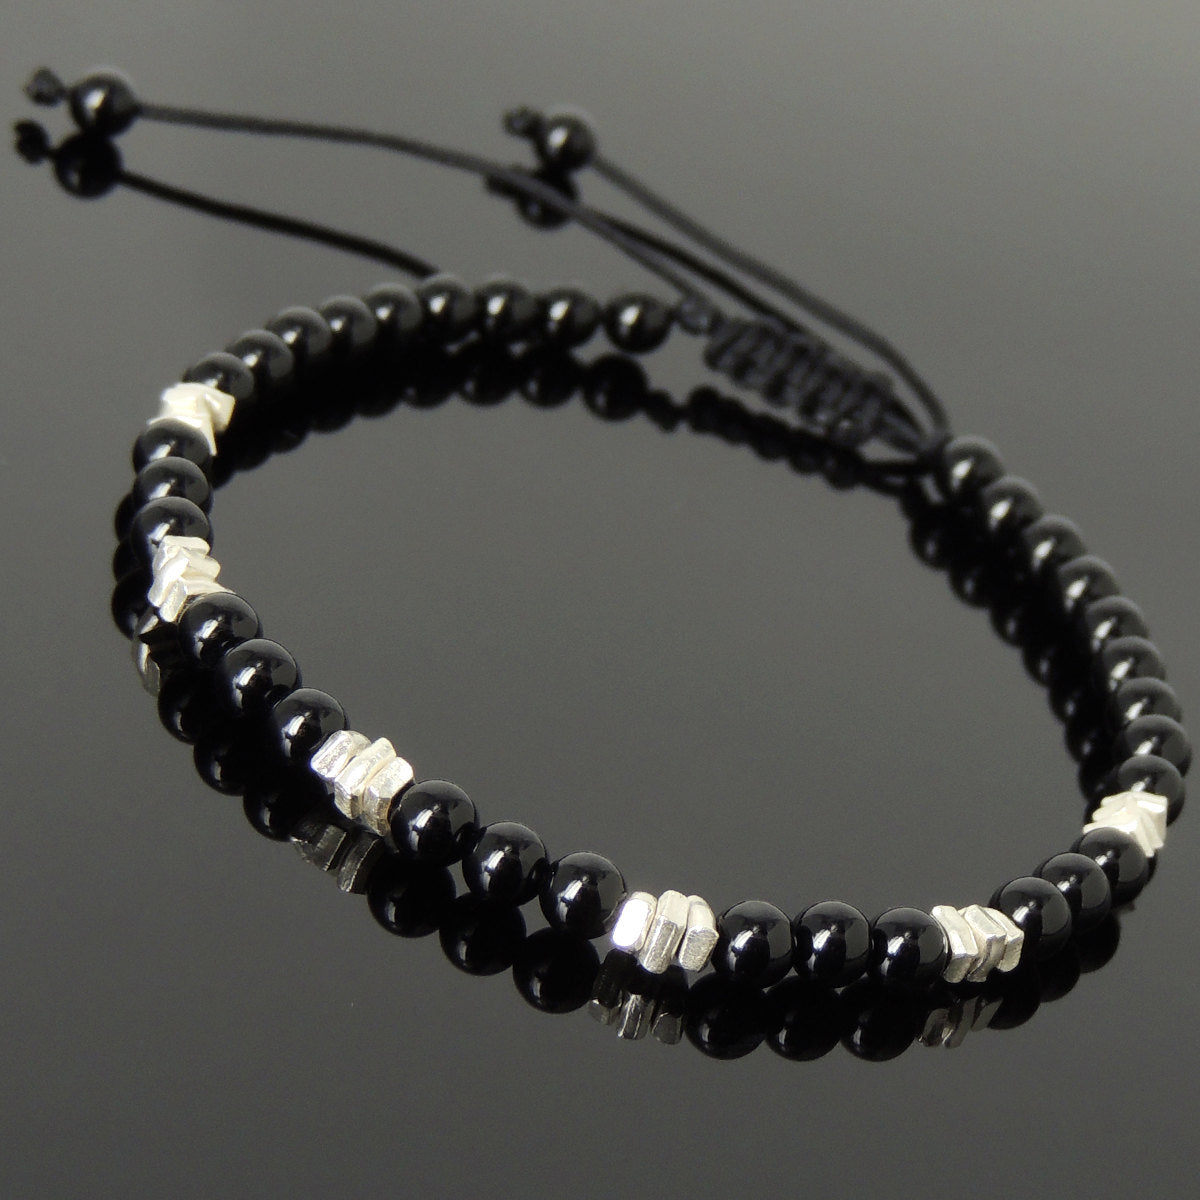 4mm Bright Black Onyx Adjustable Braided Gemstone Bracelet with S925 Sterling Silver Nugget Beads - Handmade by Gem & Silver BR959